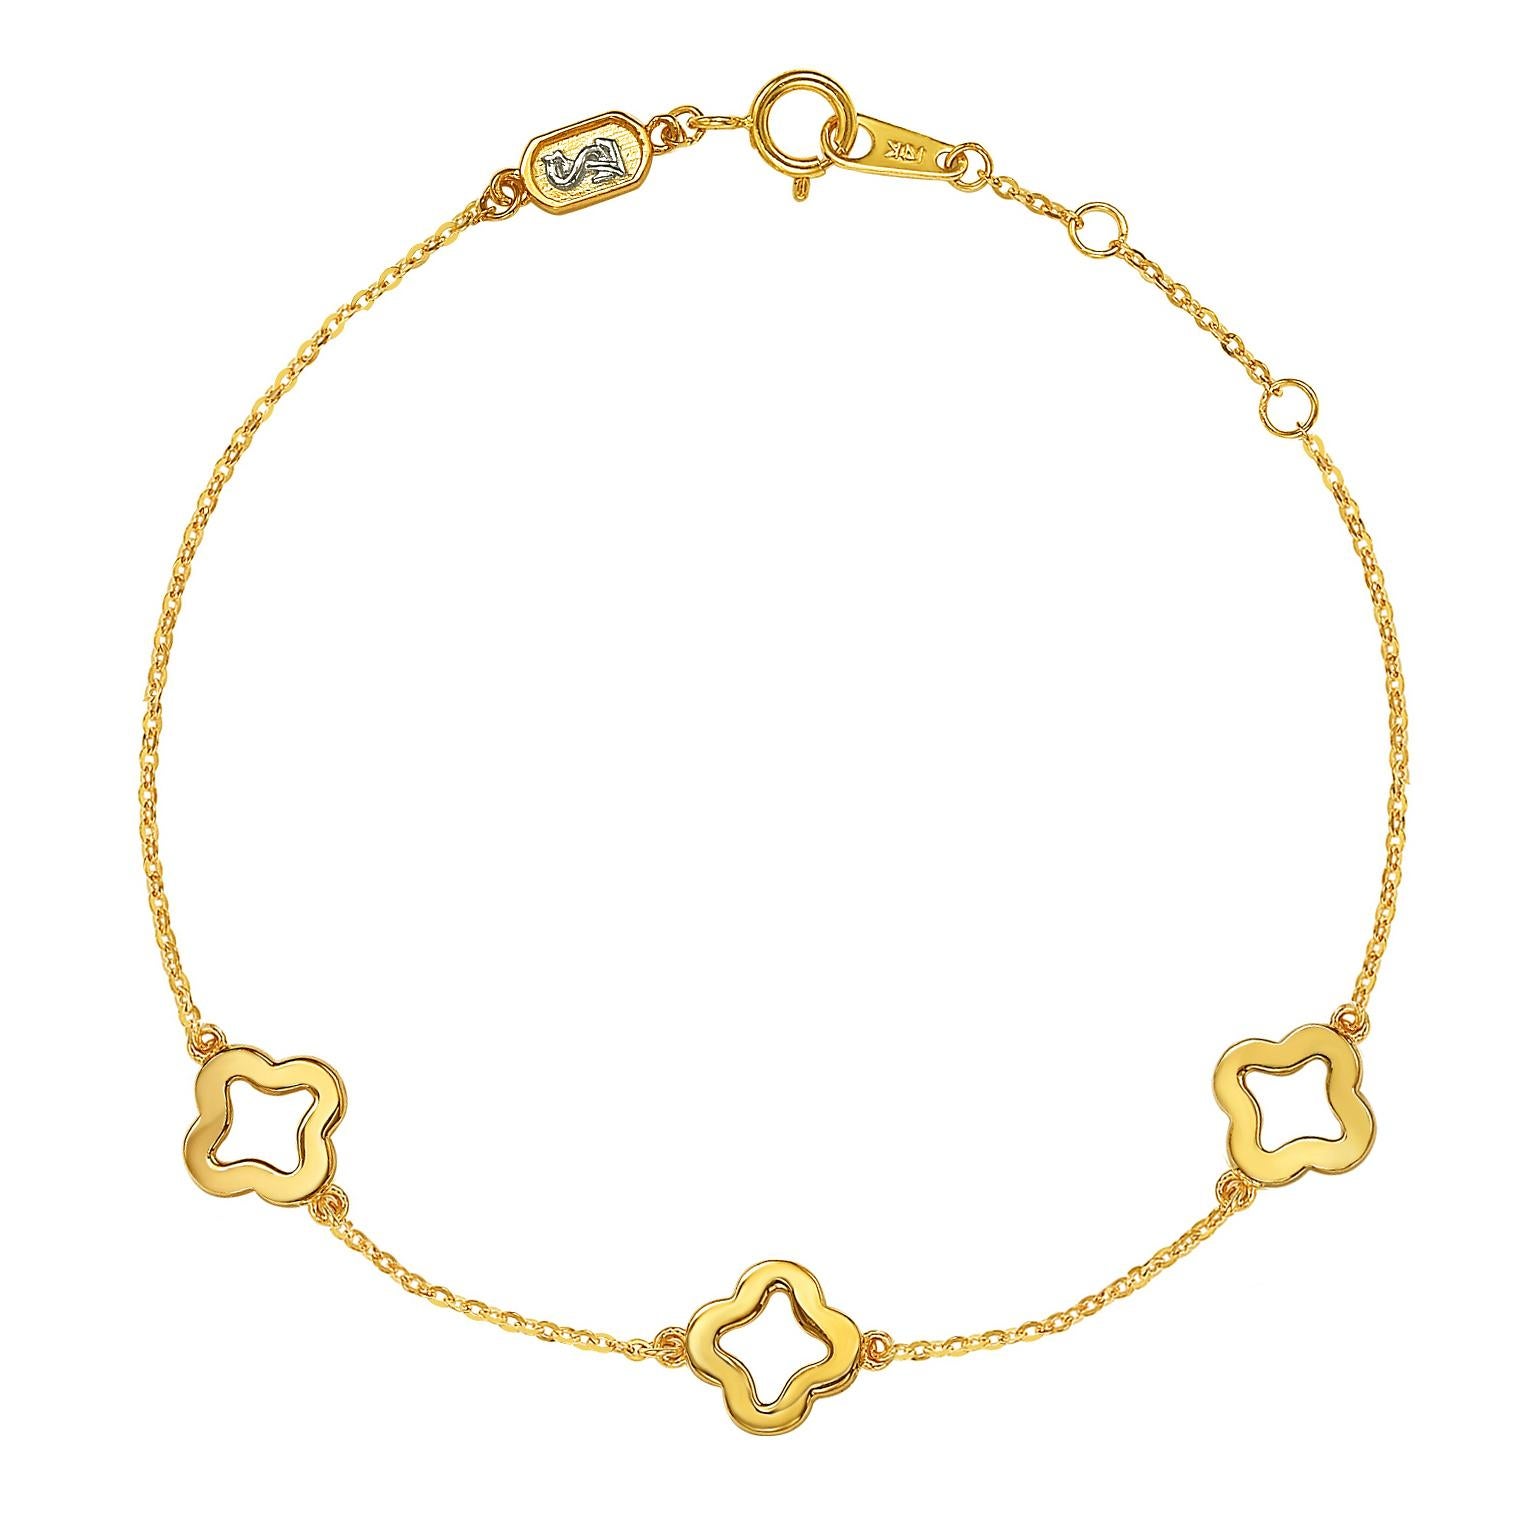 This elegant Suzy Levian by the yard open clover bracelet, features 54, 1 mm diamond stones, which totals .27 cttw, all set in 14K yellow gold setting. There are 3 open clover attached to chain , that are secured with a spring ring closure with a